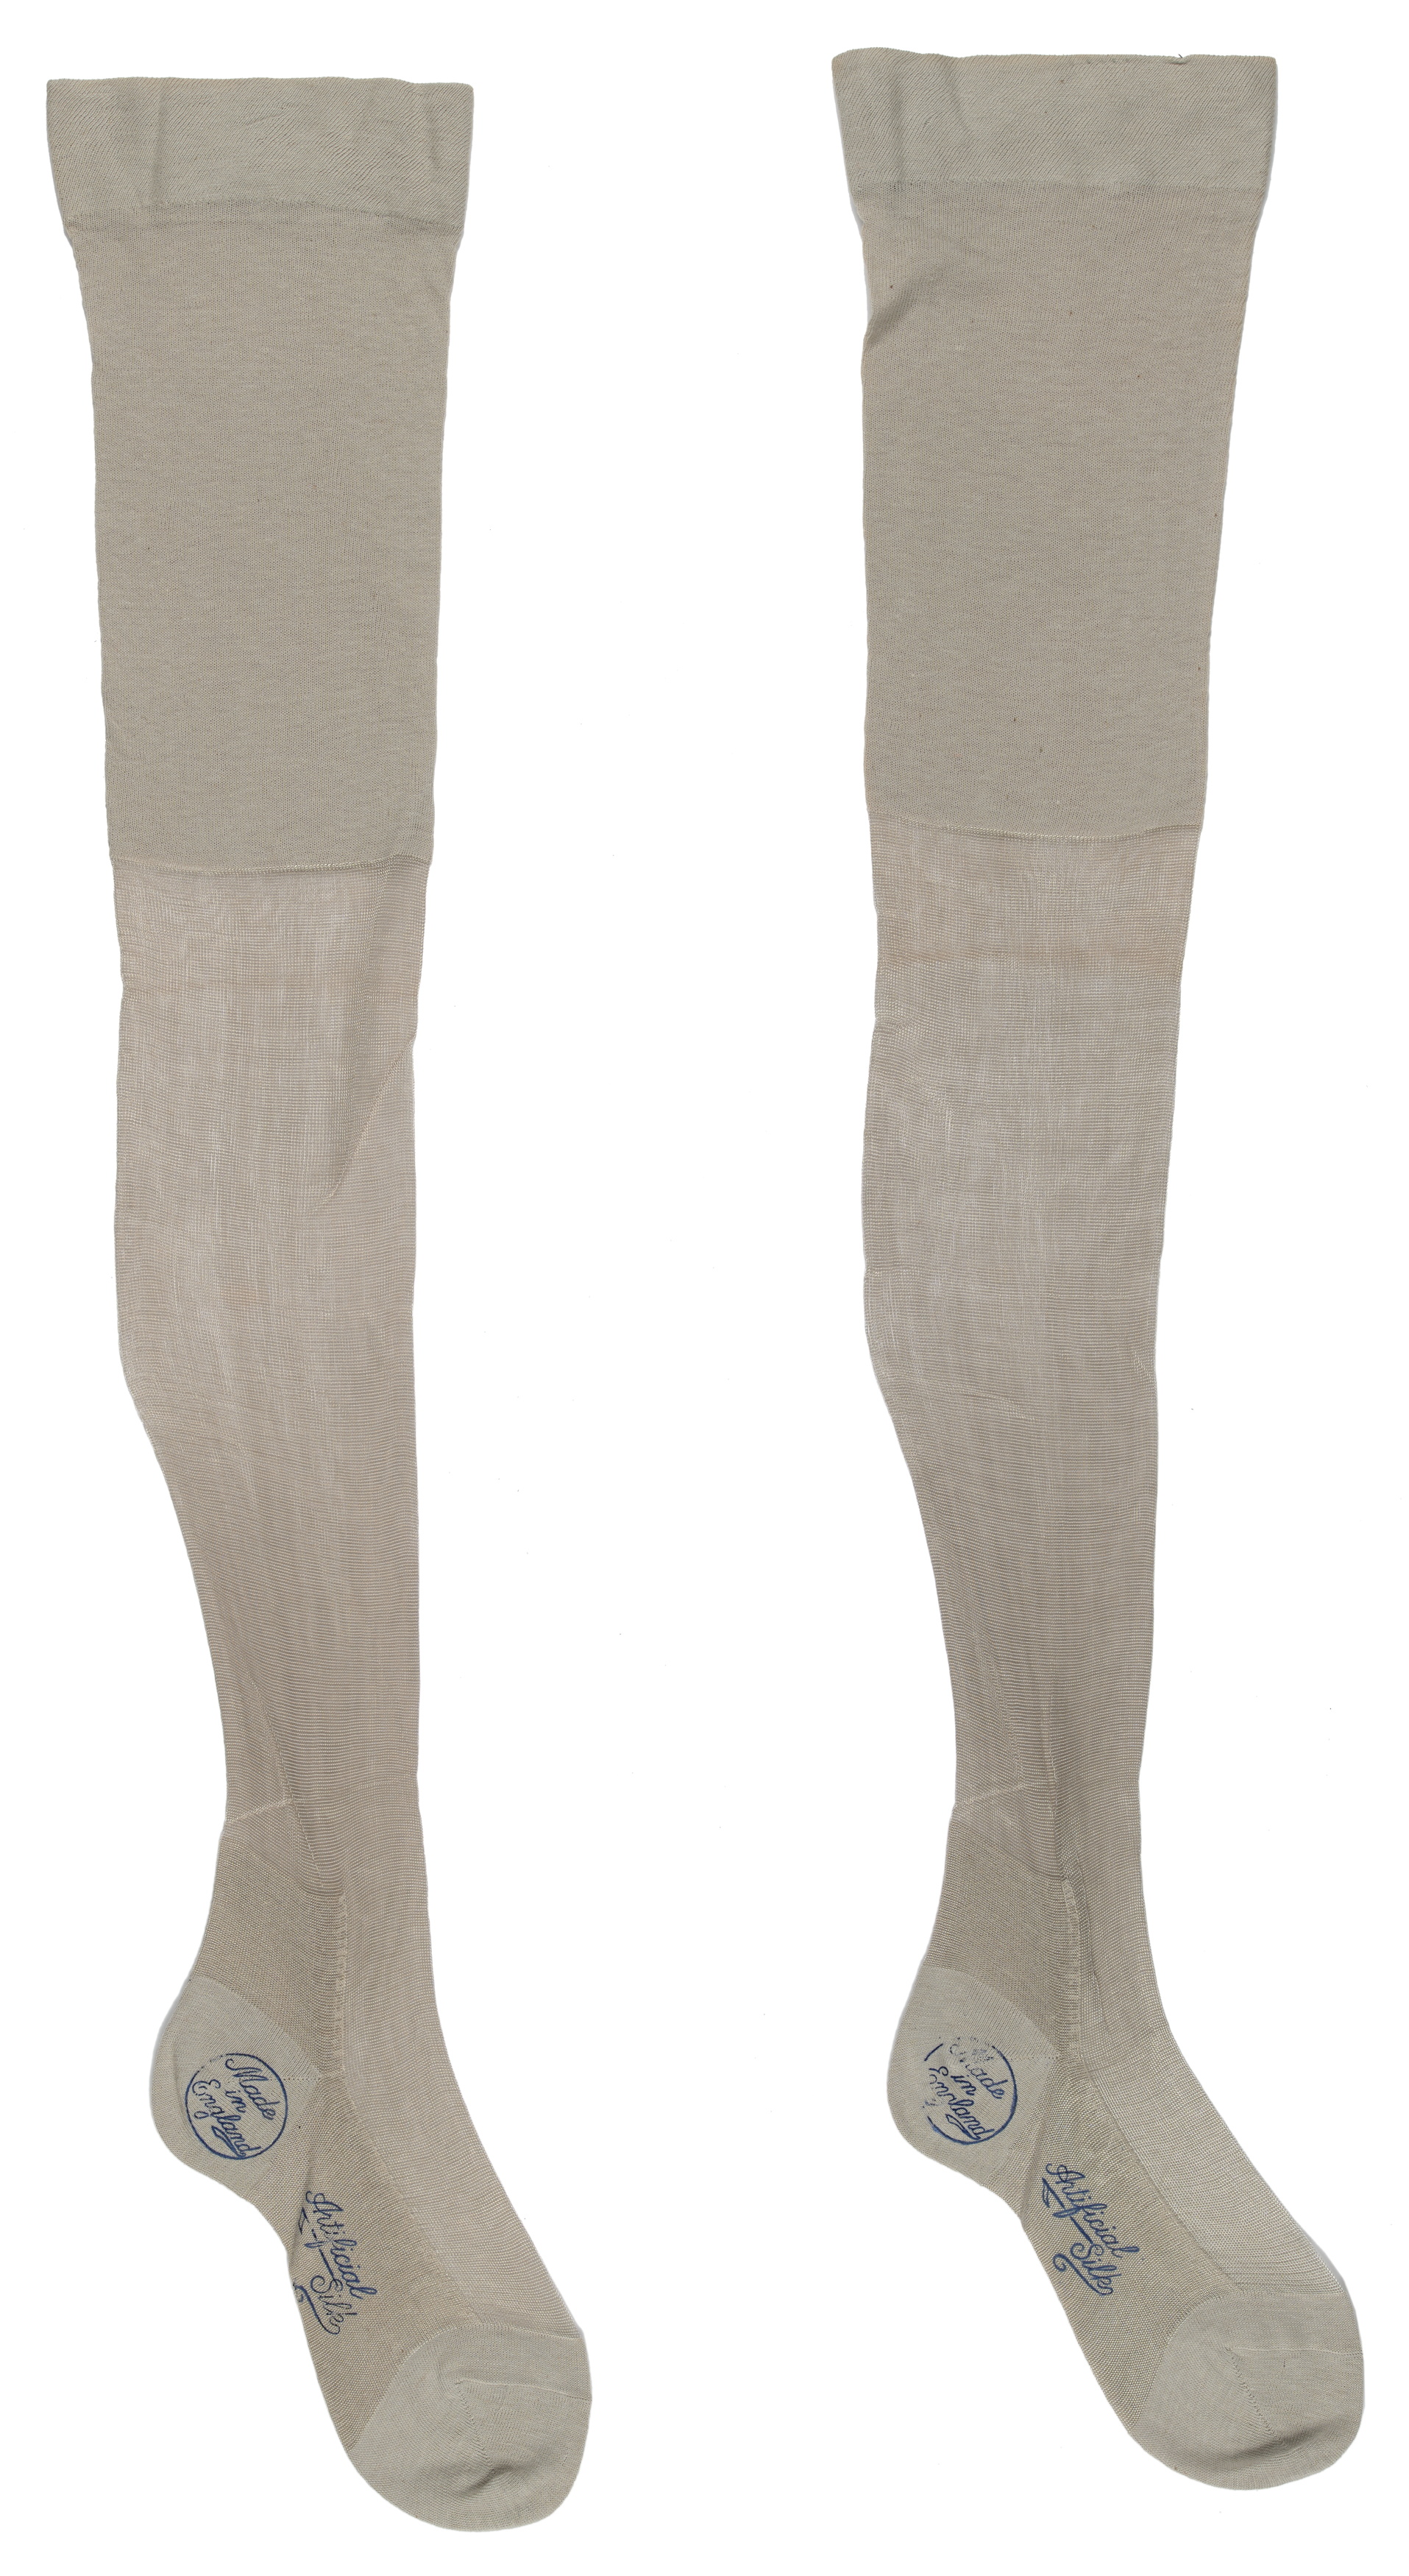 Pair of womens stockings from England